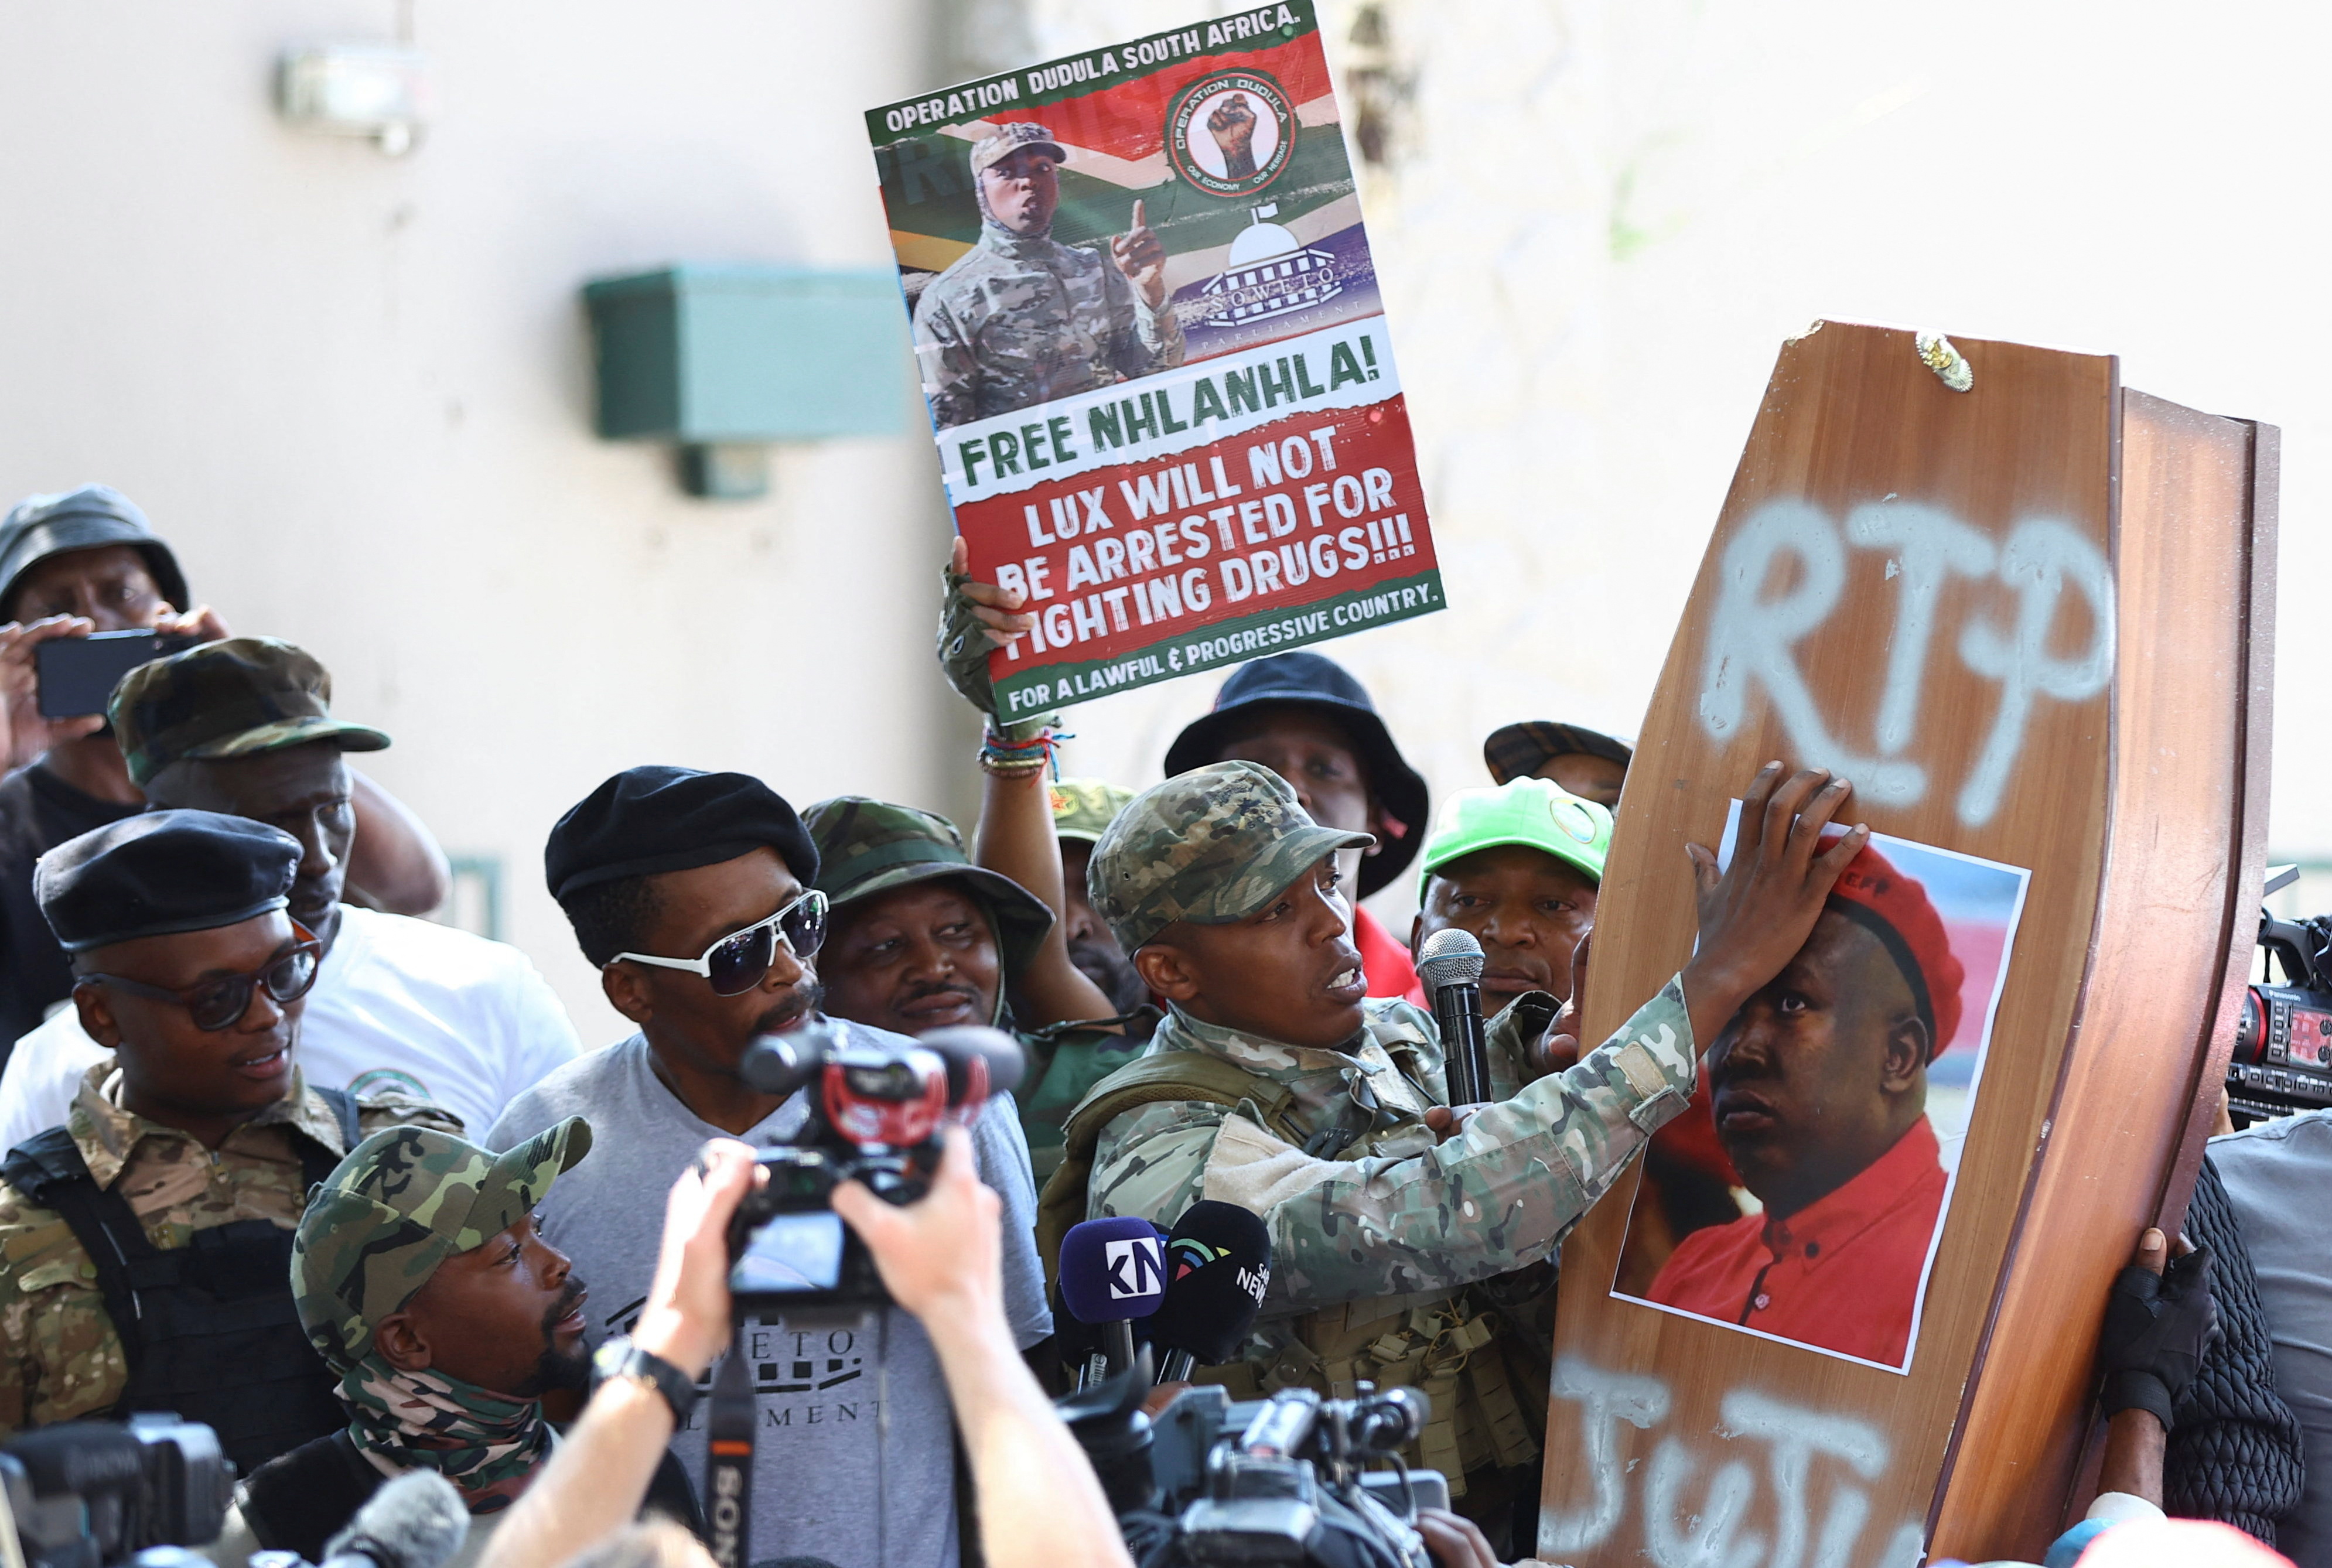 Anti-migrant vigilante group Dudula stokes tensions in South Africa